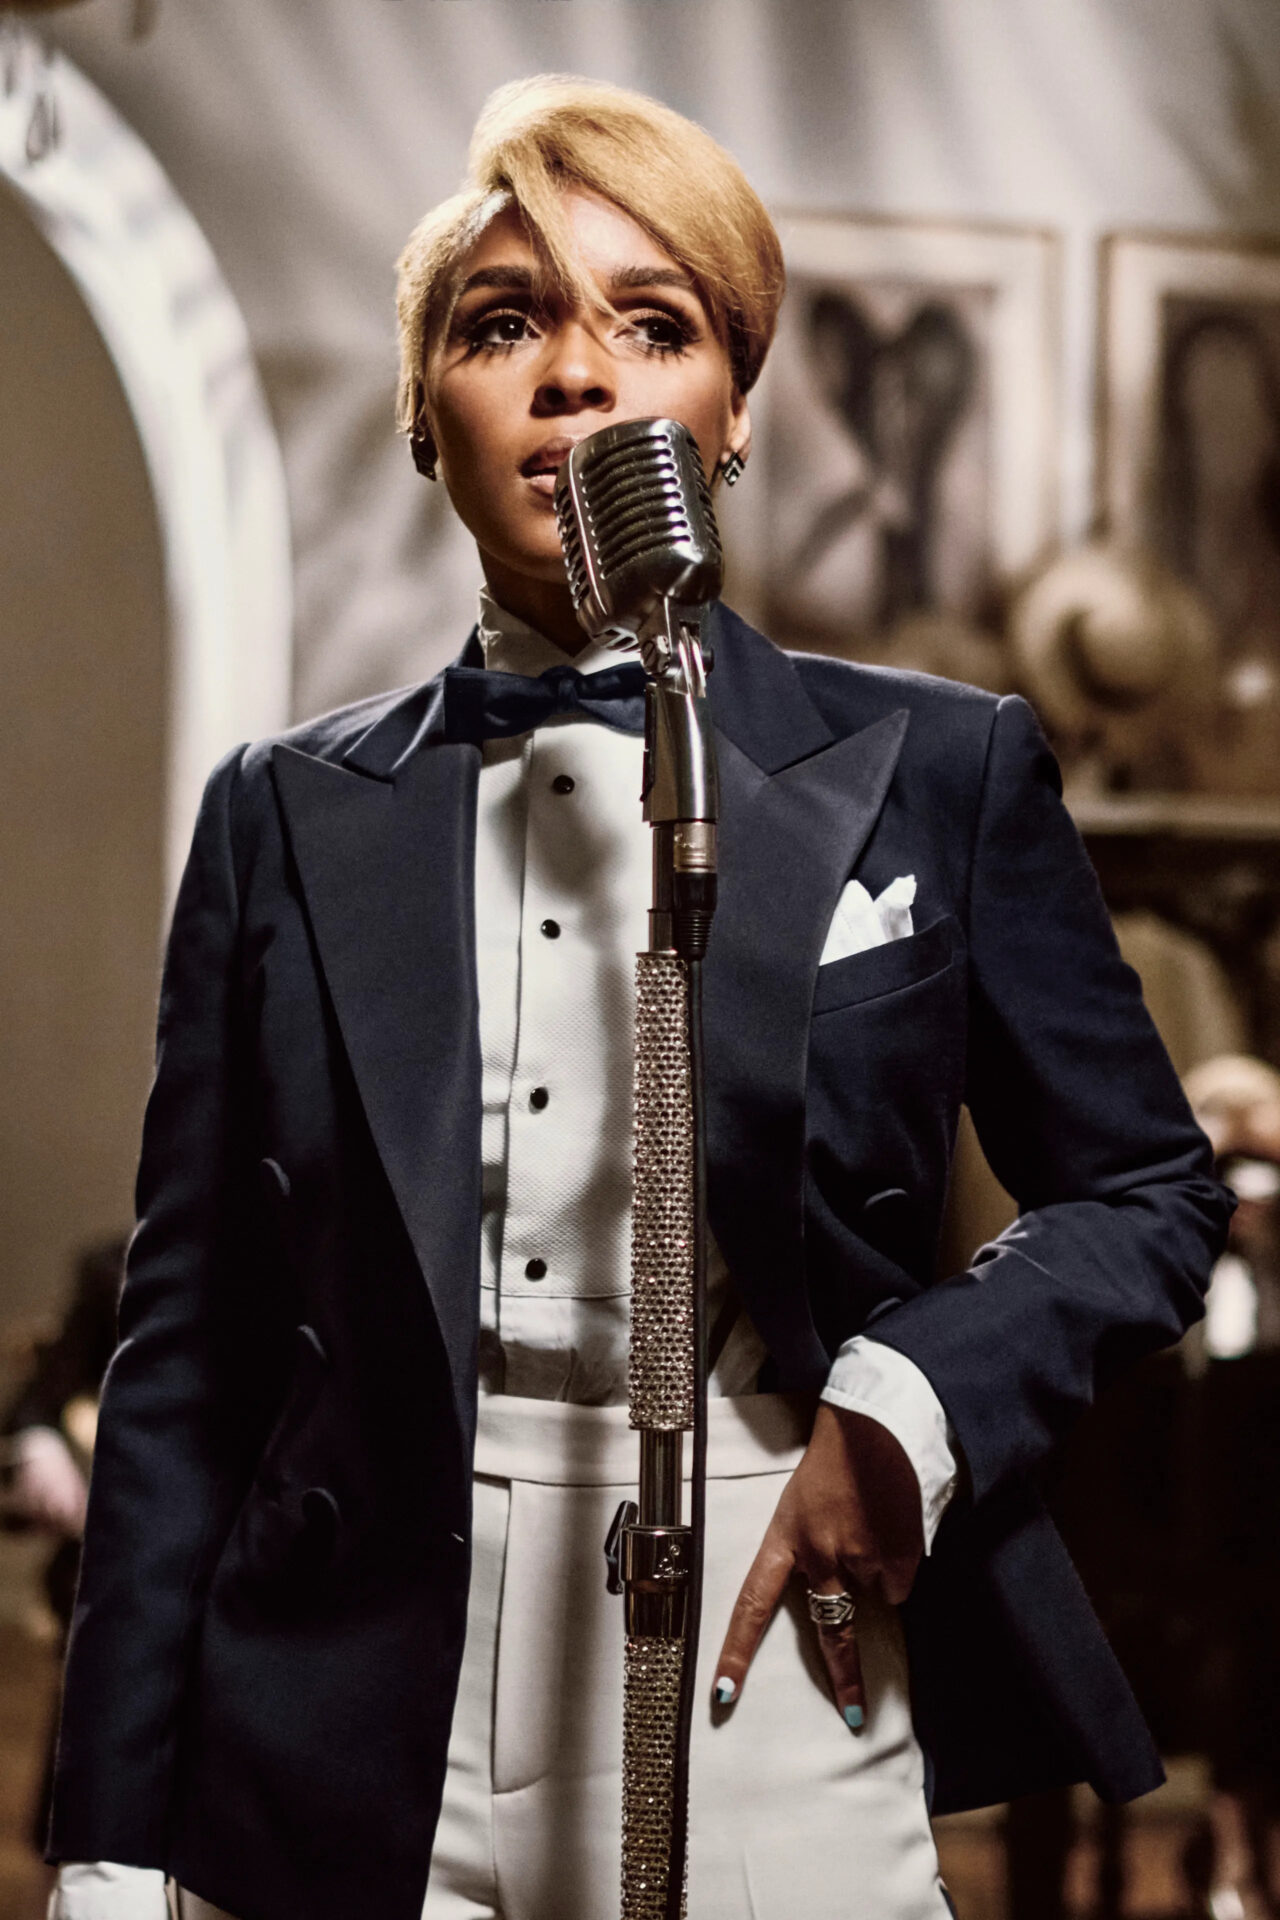 Janelle Monáe Teleports to Old Hollywood for a Ralph Lauren Fashion Film